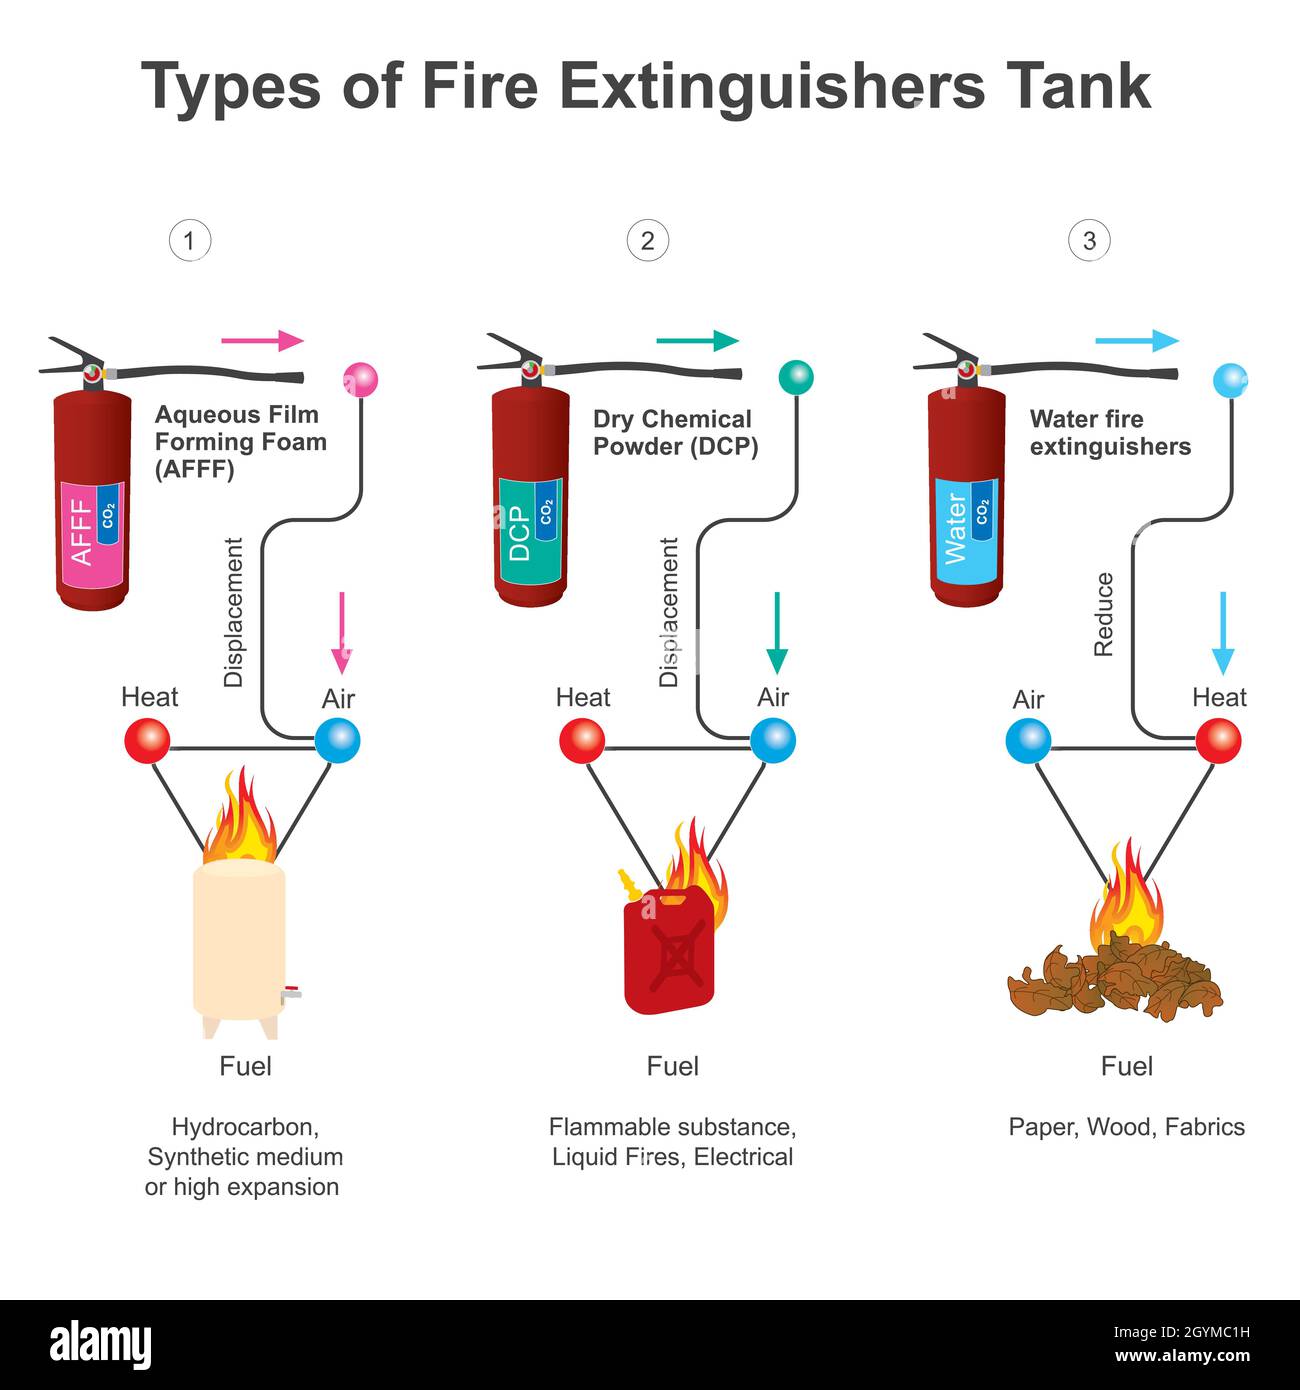 Types of Fire Extinguishers Tank. Diagram showing different types of extinguishers tank for fire emergency Stock Vector